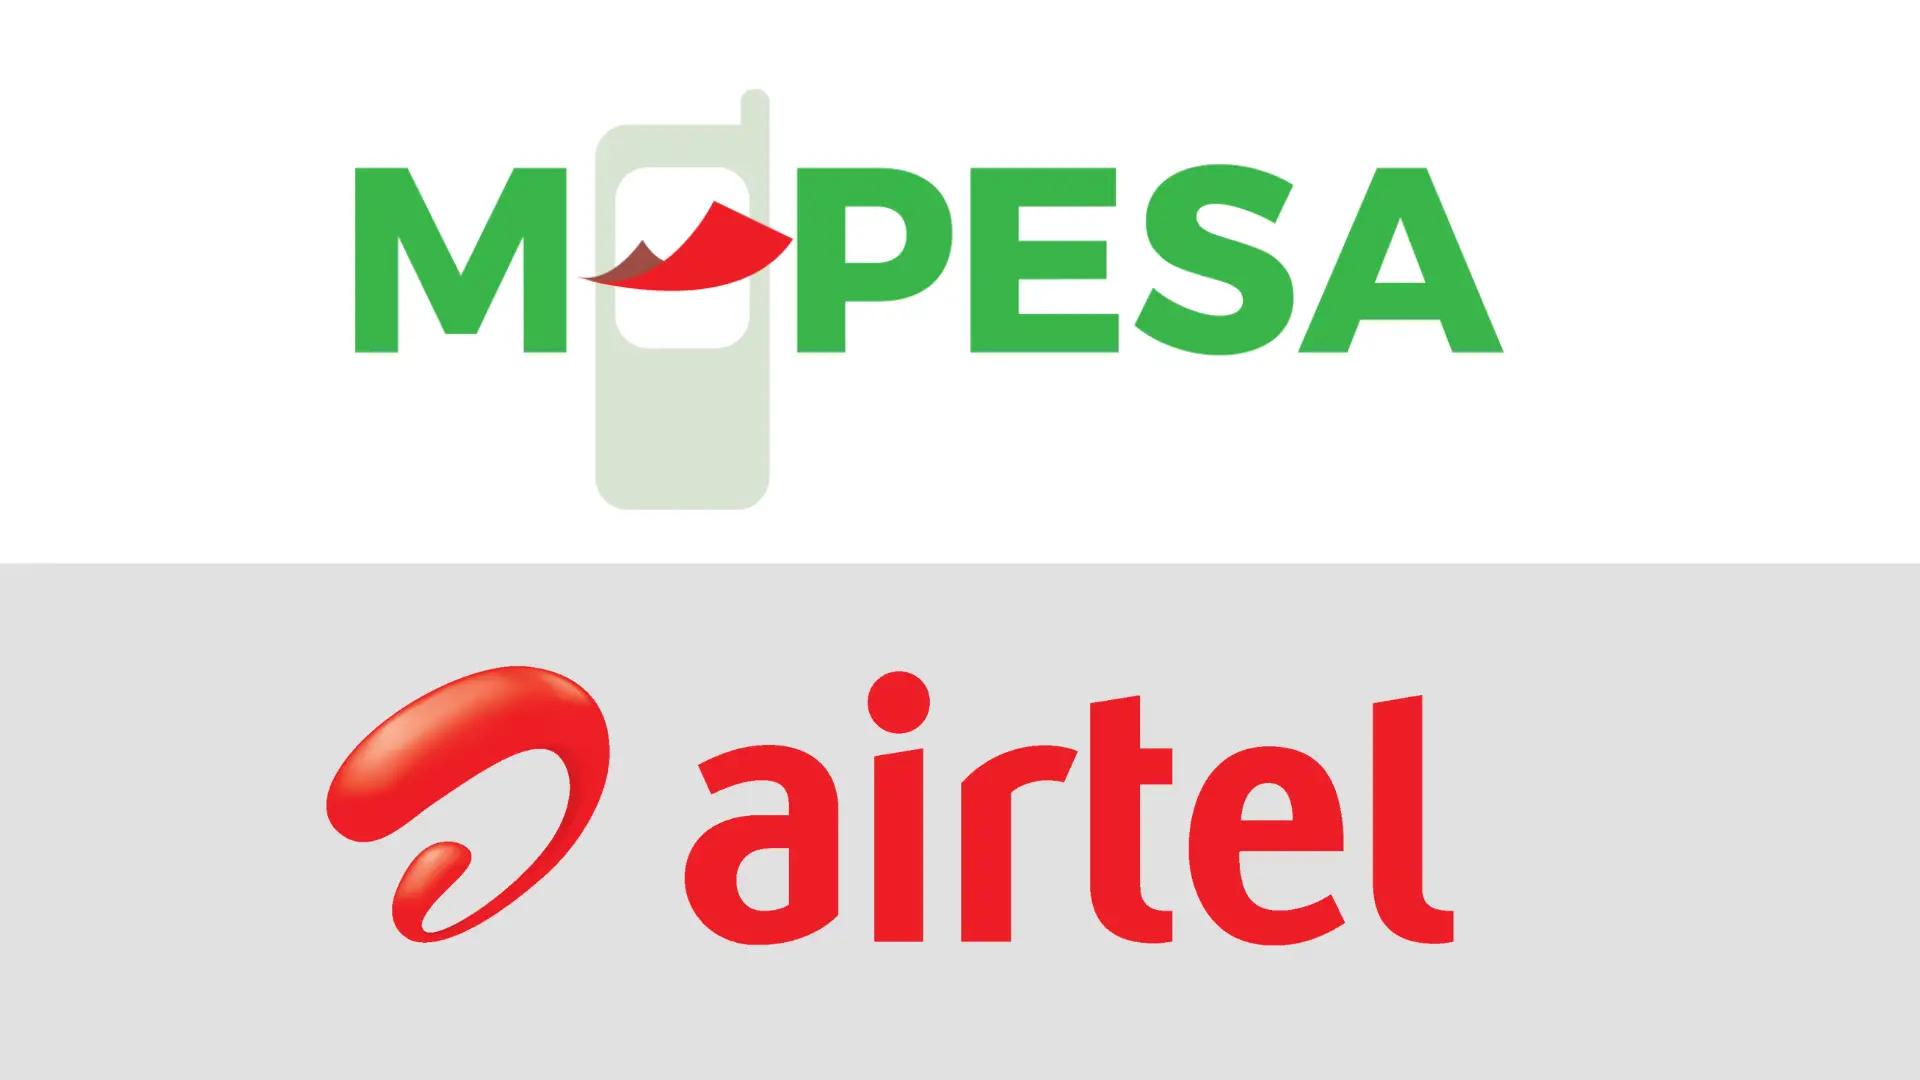 After M-PESA, Airtel Money increases wallet limit to $3,400